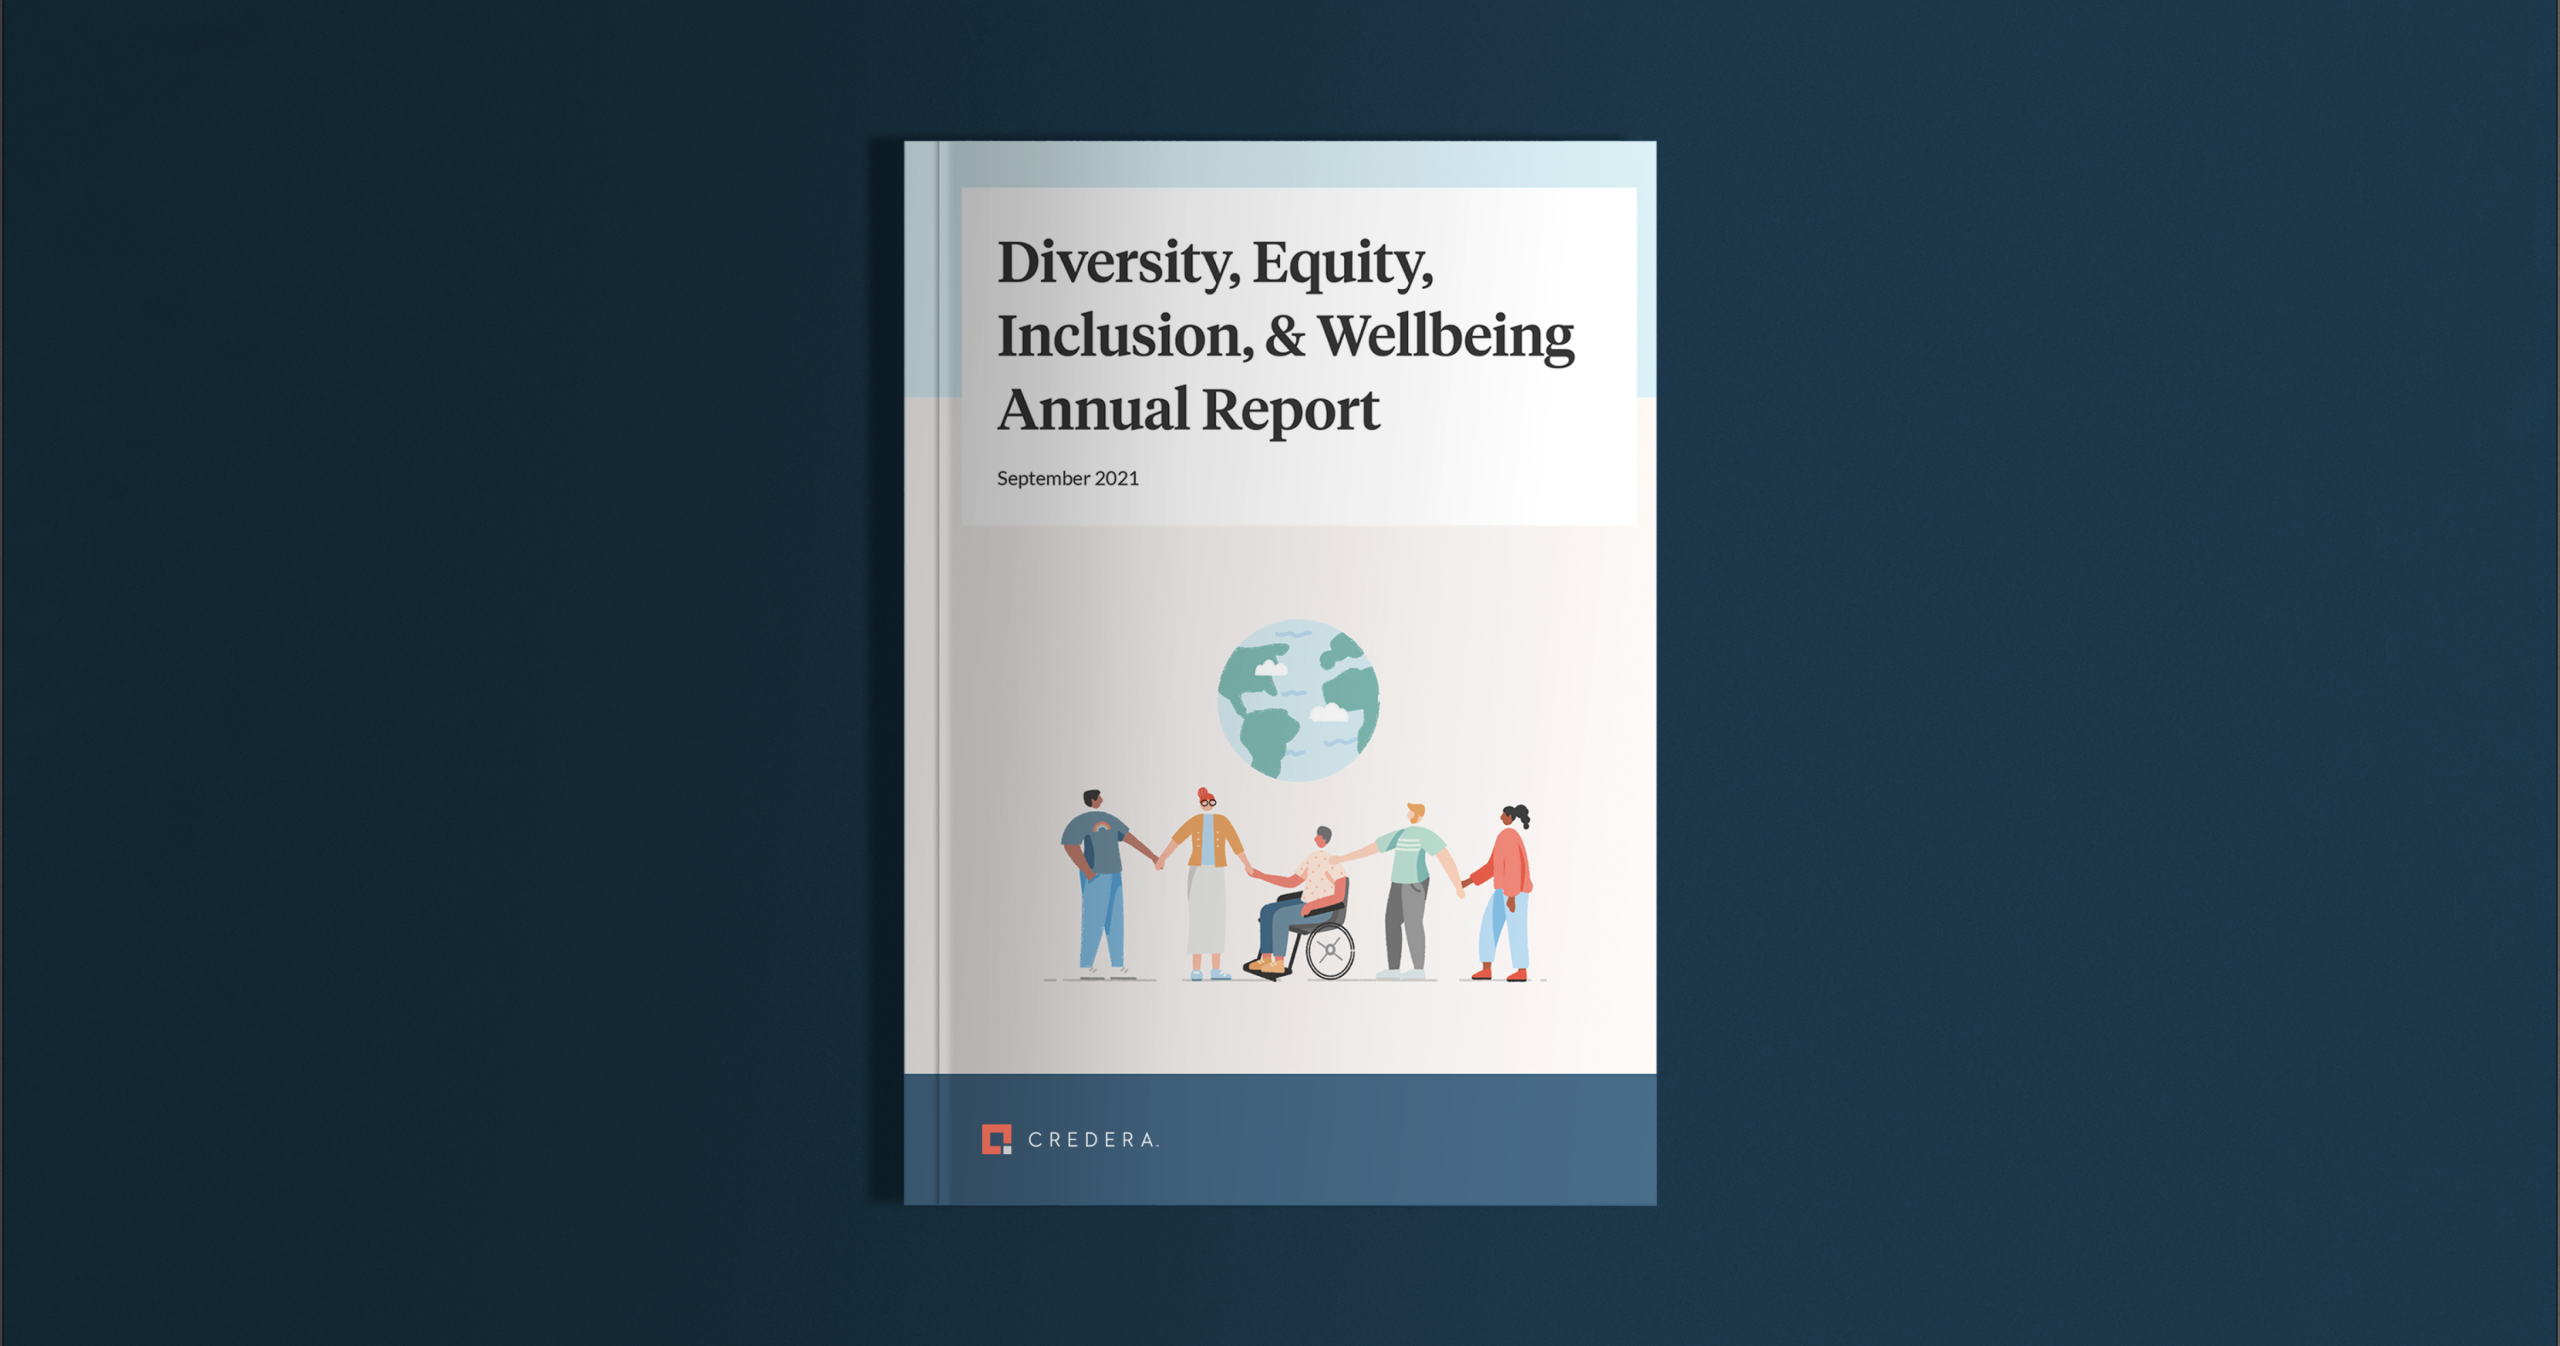 Credera's 2021 Diversity, Equity, Inclusion, & Wellbeing Annual Report